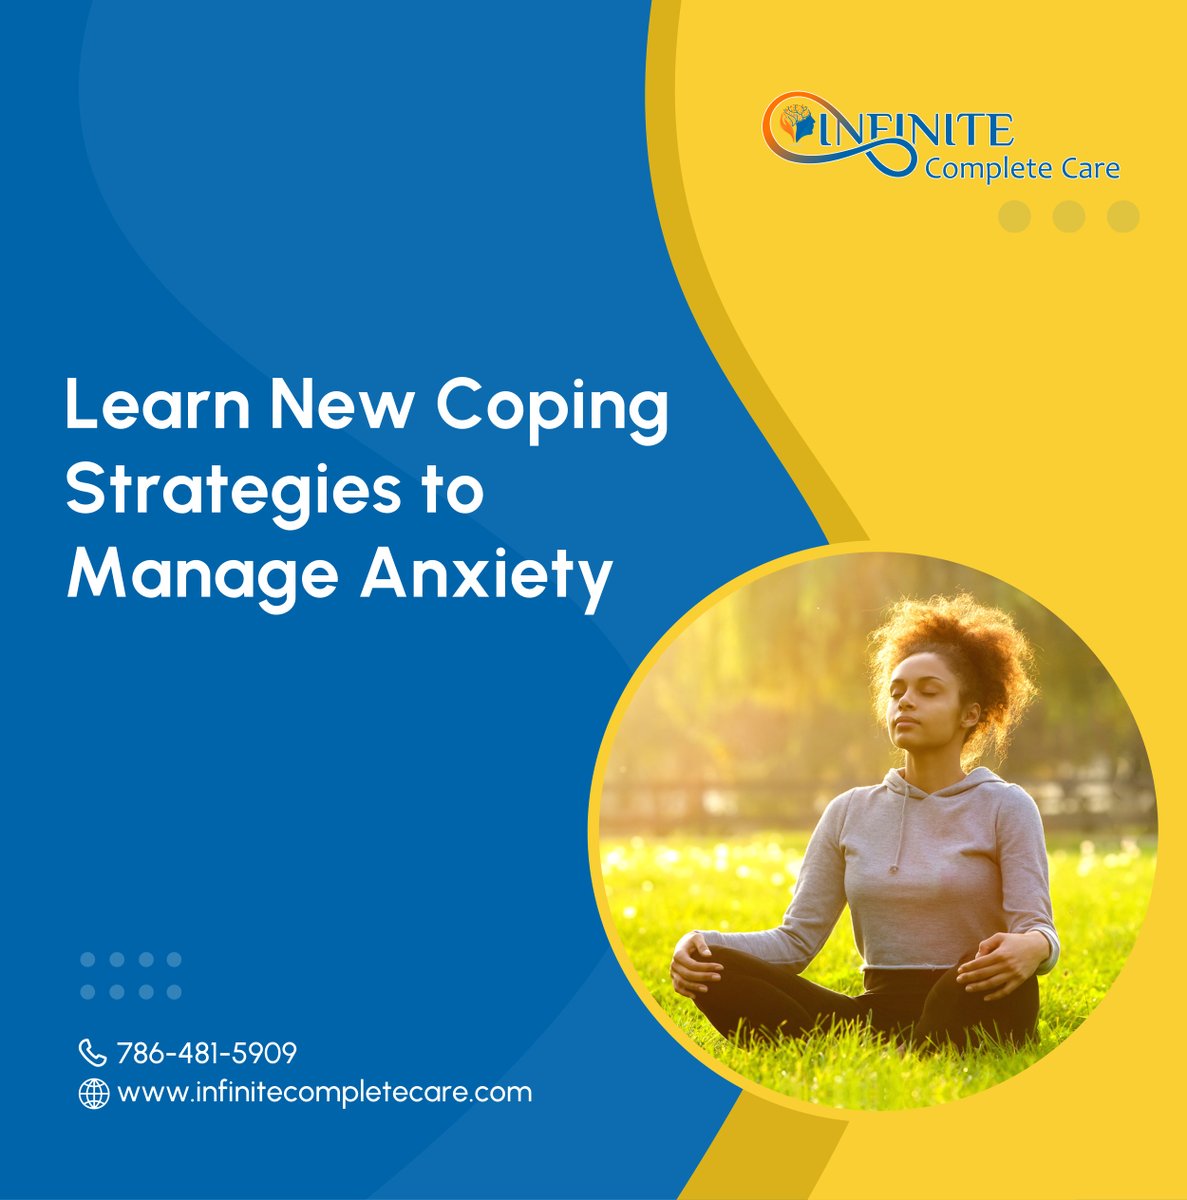 Discover effective techniques to ease anxiety. Explore deep breathing, mindfulness meditation, grounding exercises, positive affirmations, seeking support, and more. Take charge of your mental wellness today! Book with us here: tinyurl.com/4s4t39a2. 

#AnxietyManagement